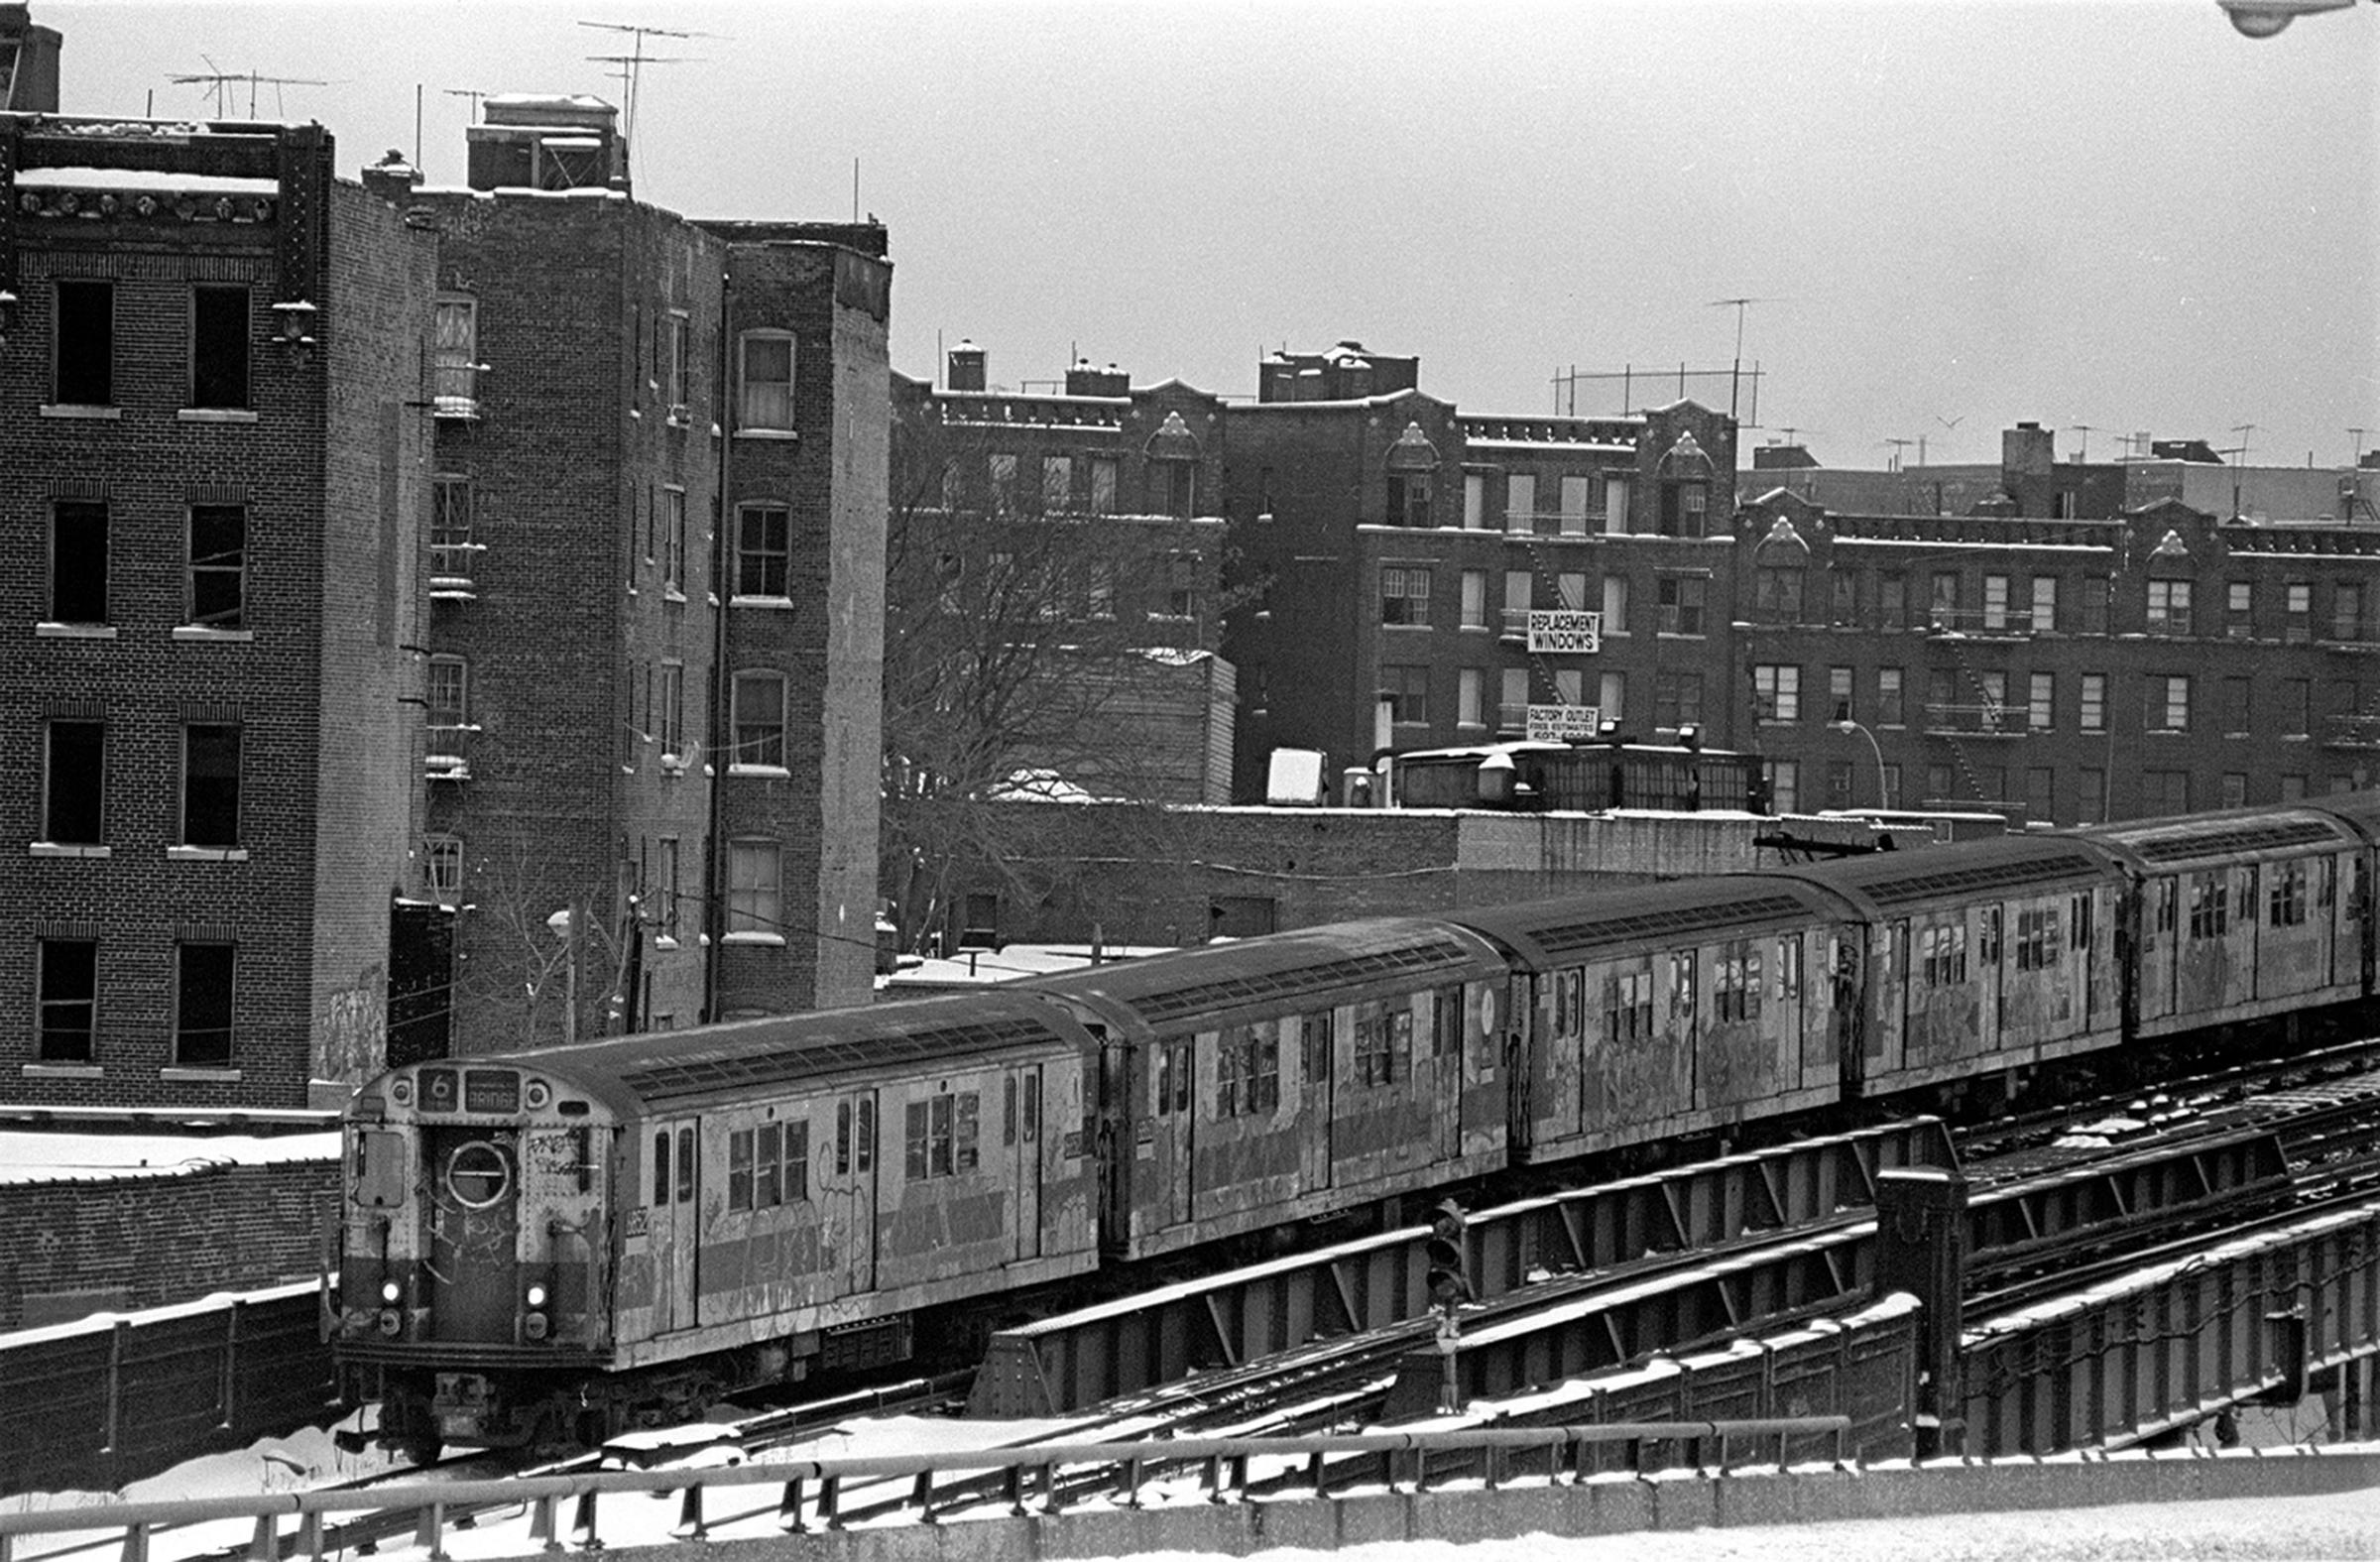 View of the number 6 local subway train as it passes through the South Bronx neighborhood, New York, New York, 1975.